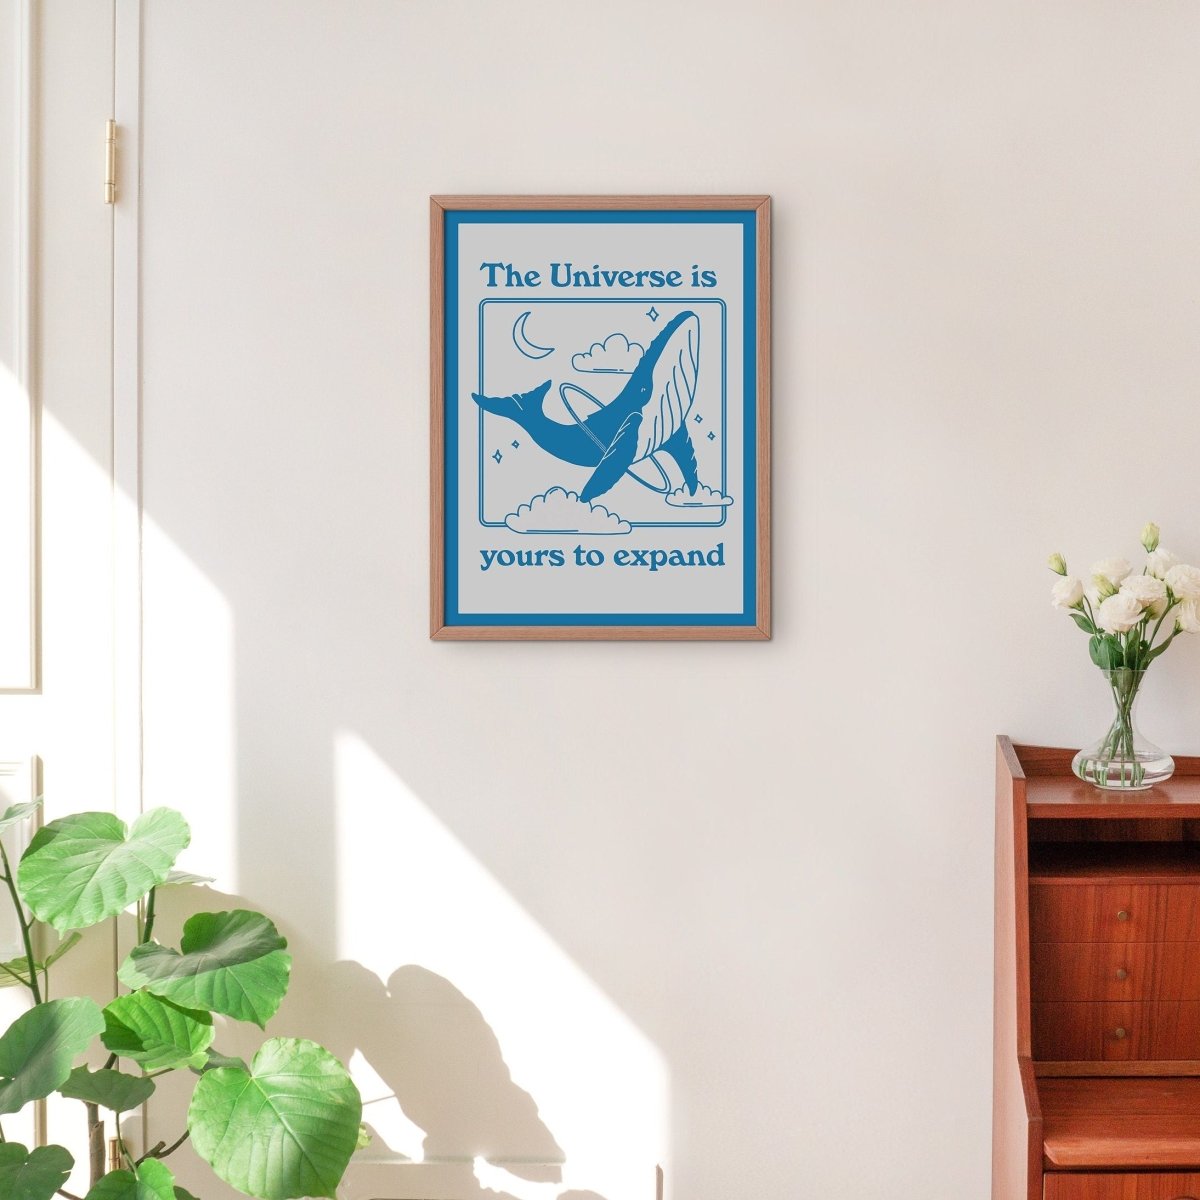 'The Universe Is Yours' Whale Print - Art Prints - Kinder Planet Company